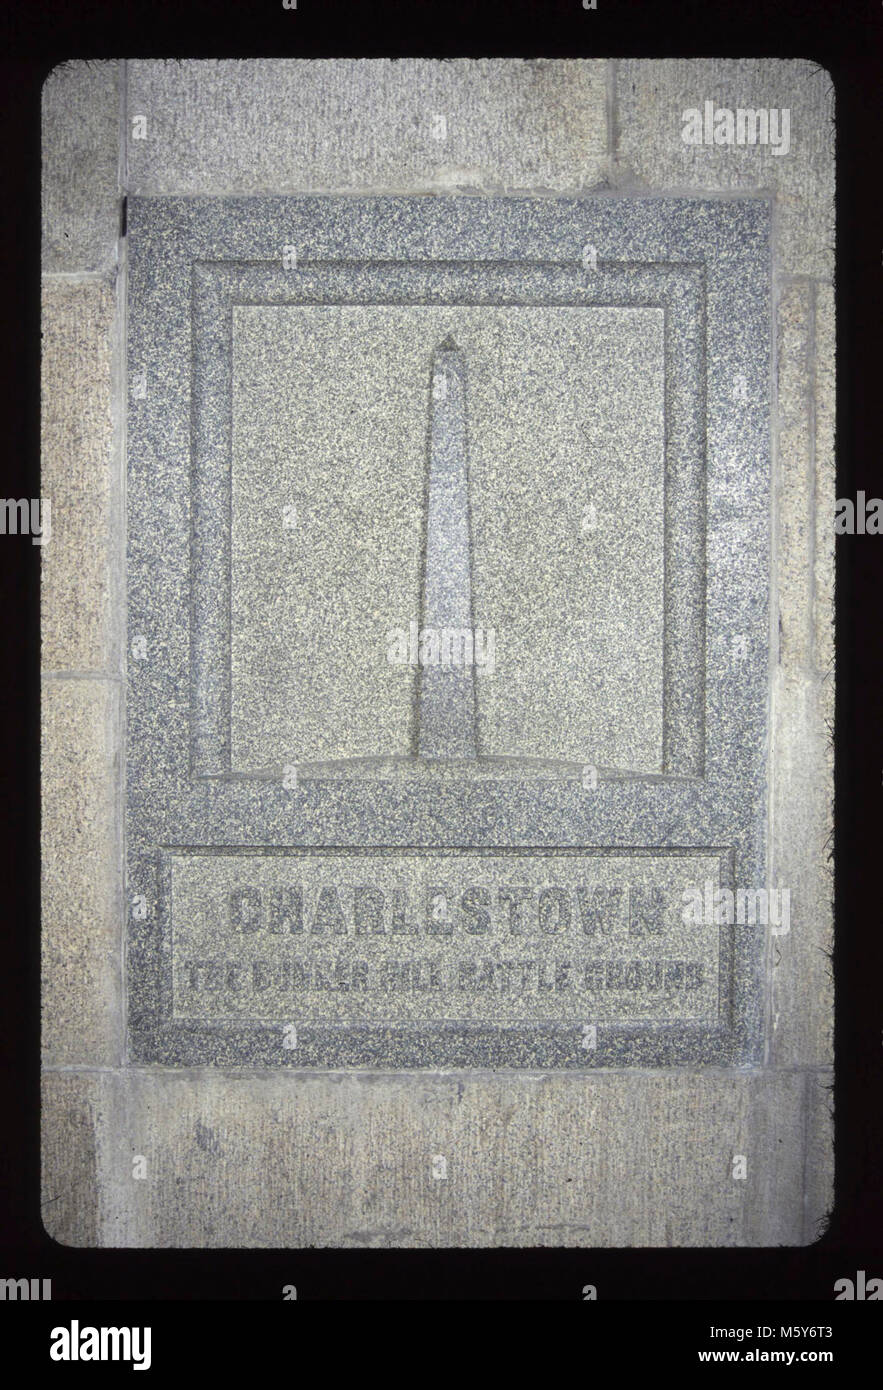 Charlestown, Massachusetts Level: 170-ft. Donor: Charlestown, Massachusetts Dates: 1854/1885 Original material: granite Dimensions: 4' 5 x 3' 3  Sculptor/Carver: not known Original inscription: Charlestown The Bunker Hill Battle Ground Stock Photo